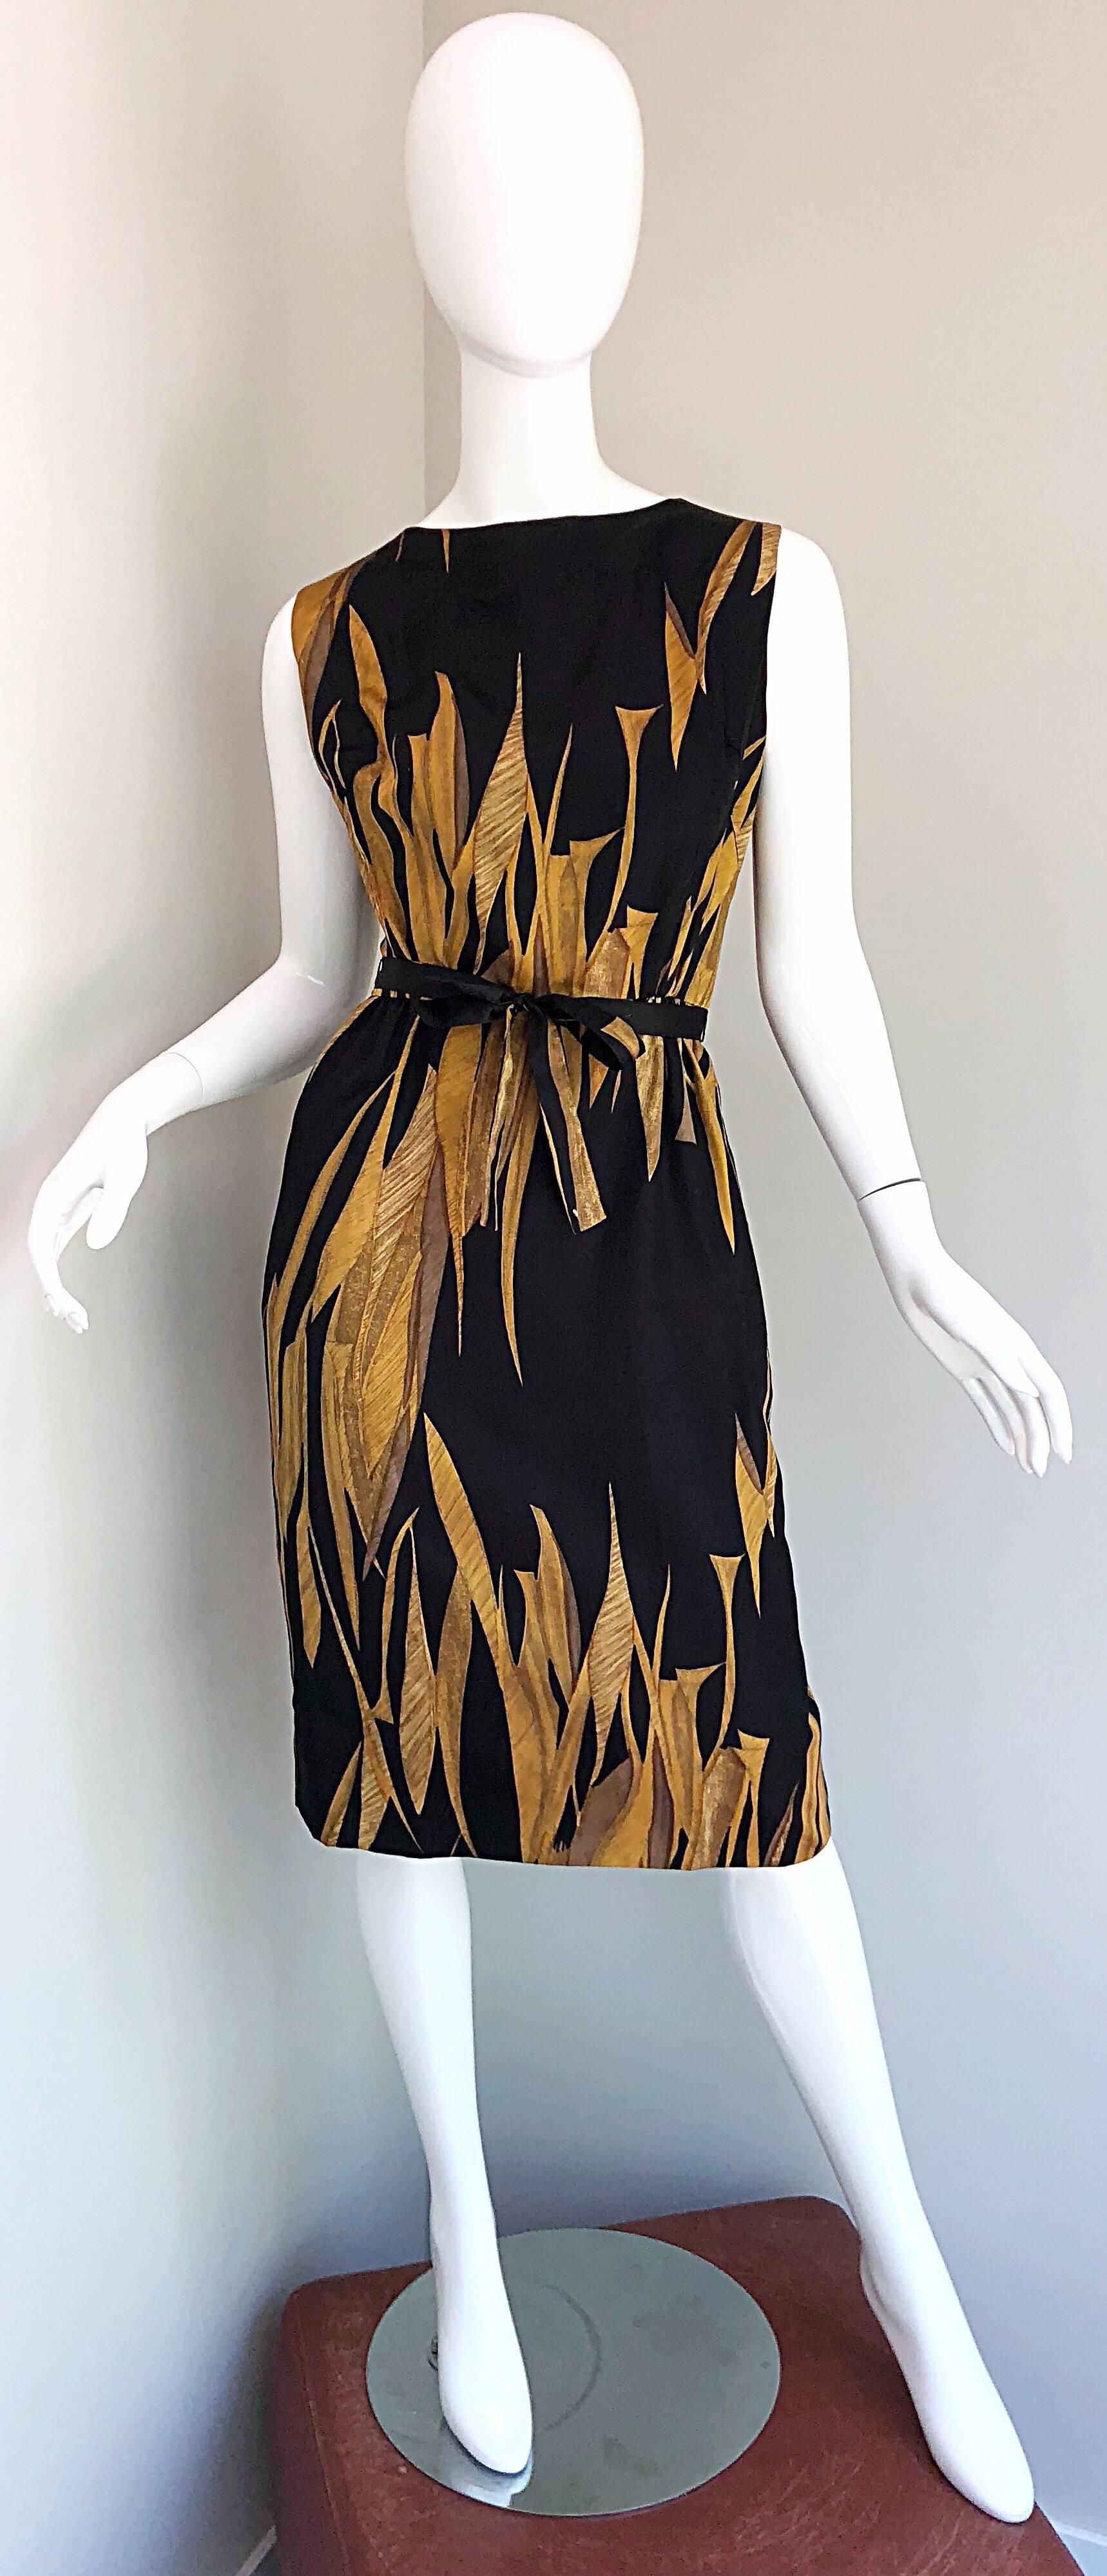 Rare 50s NEIMAN MARCUS demi couture wheat print black and muted gold silk belted dress and kimono style jacket! Fitted bodice with a flattering skirt. POCKETS at side of both hip. Detachable sash belt can either tie into a bow or sash style. Full